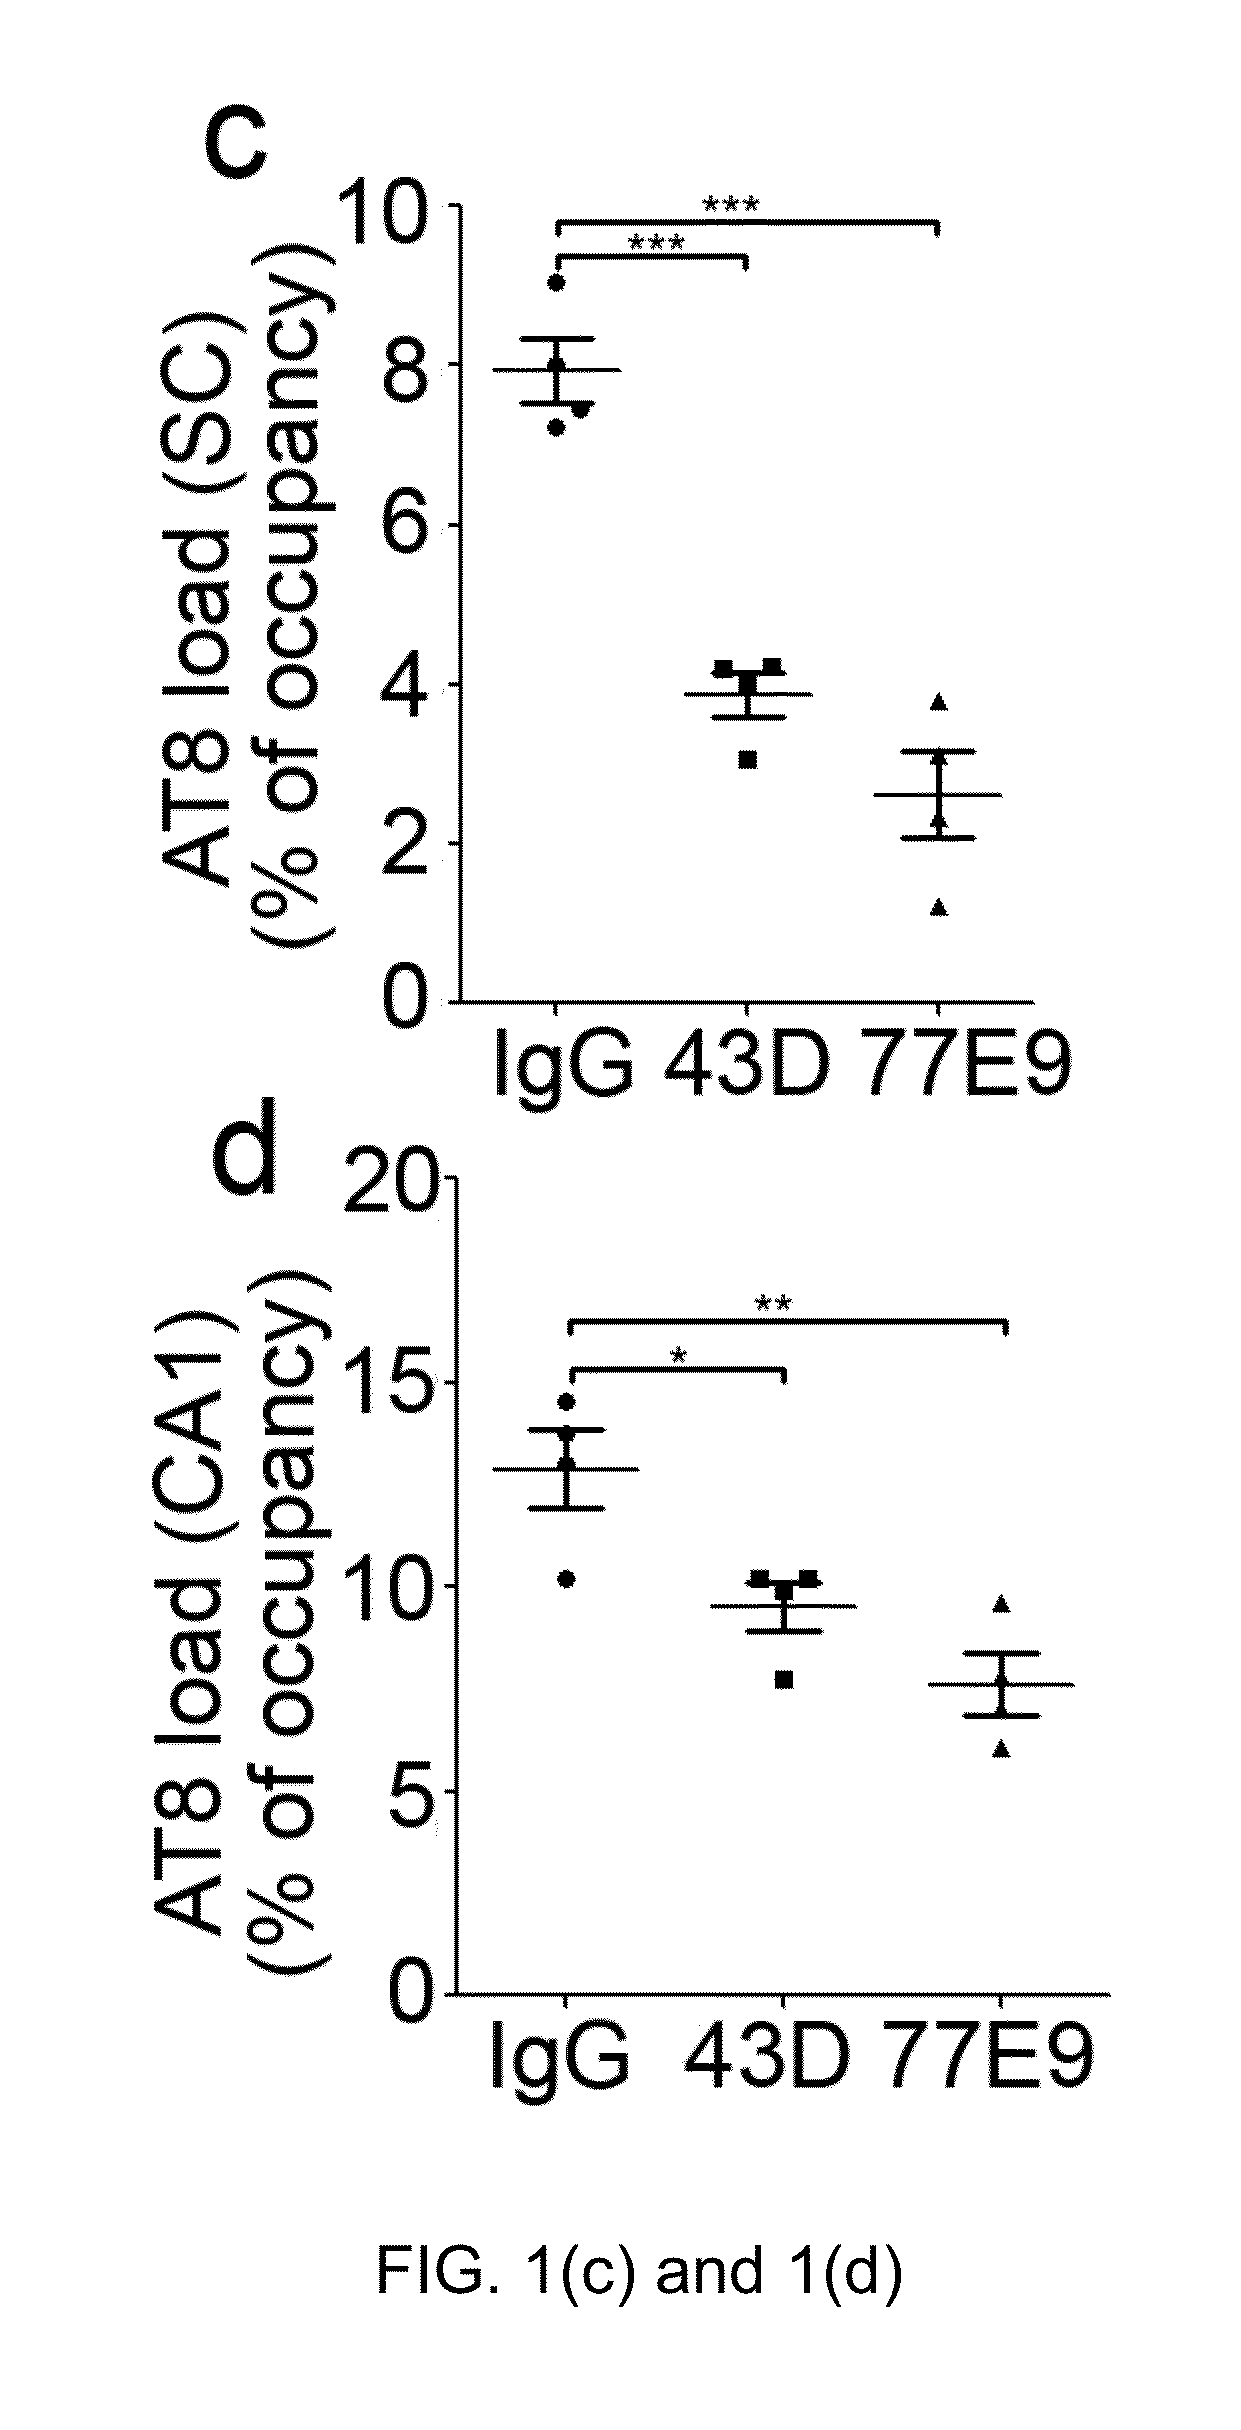 Treatment of tauopathies by passive immunization targeting the n-terminal projection domain of tau